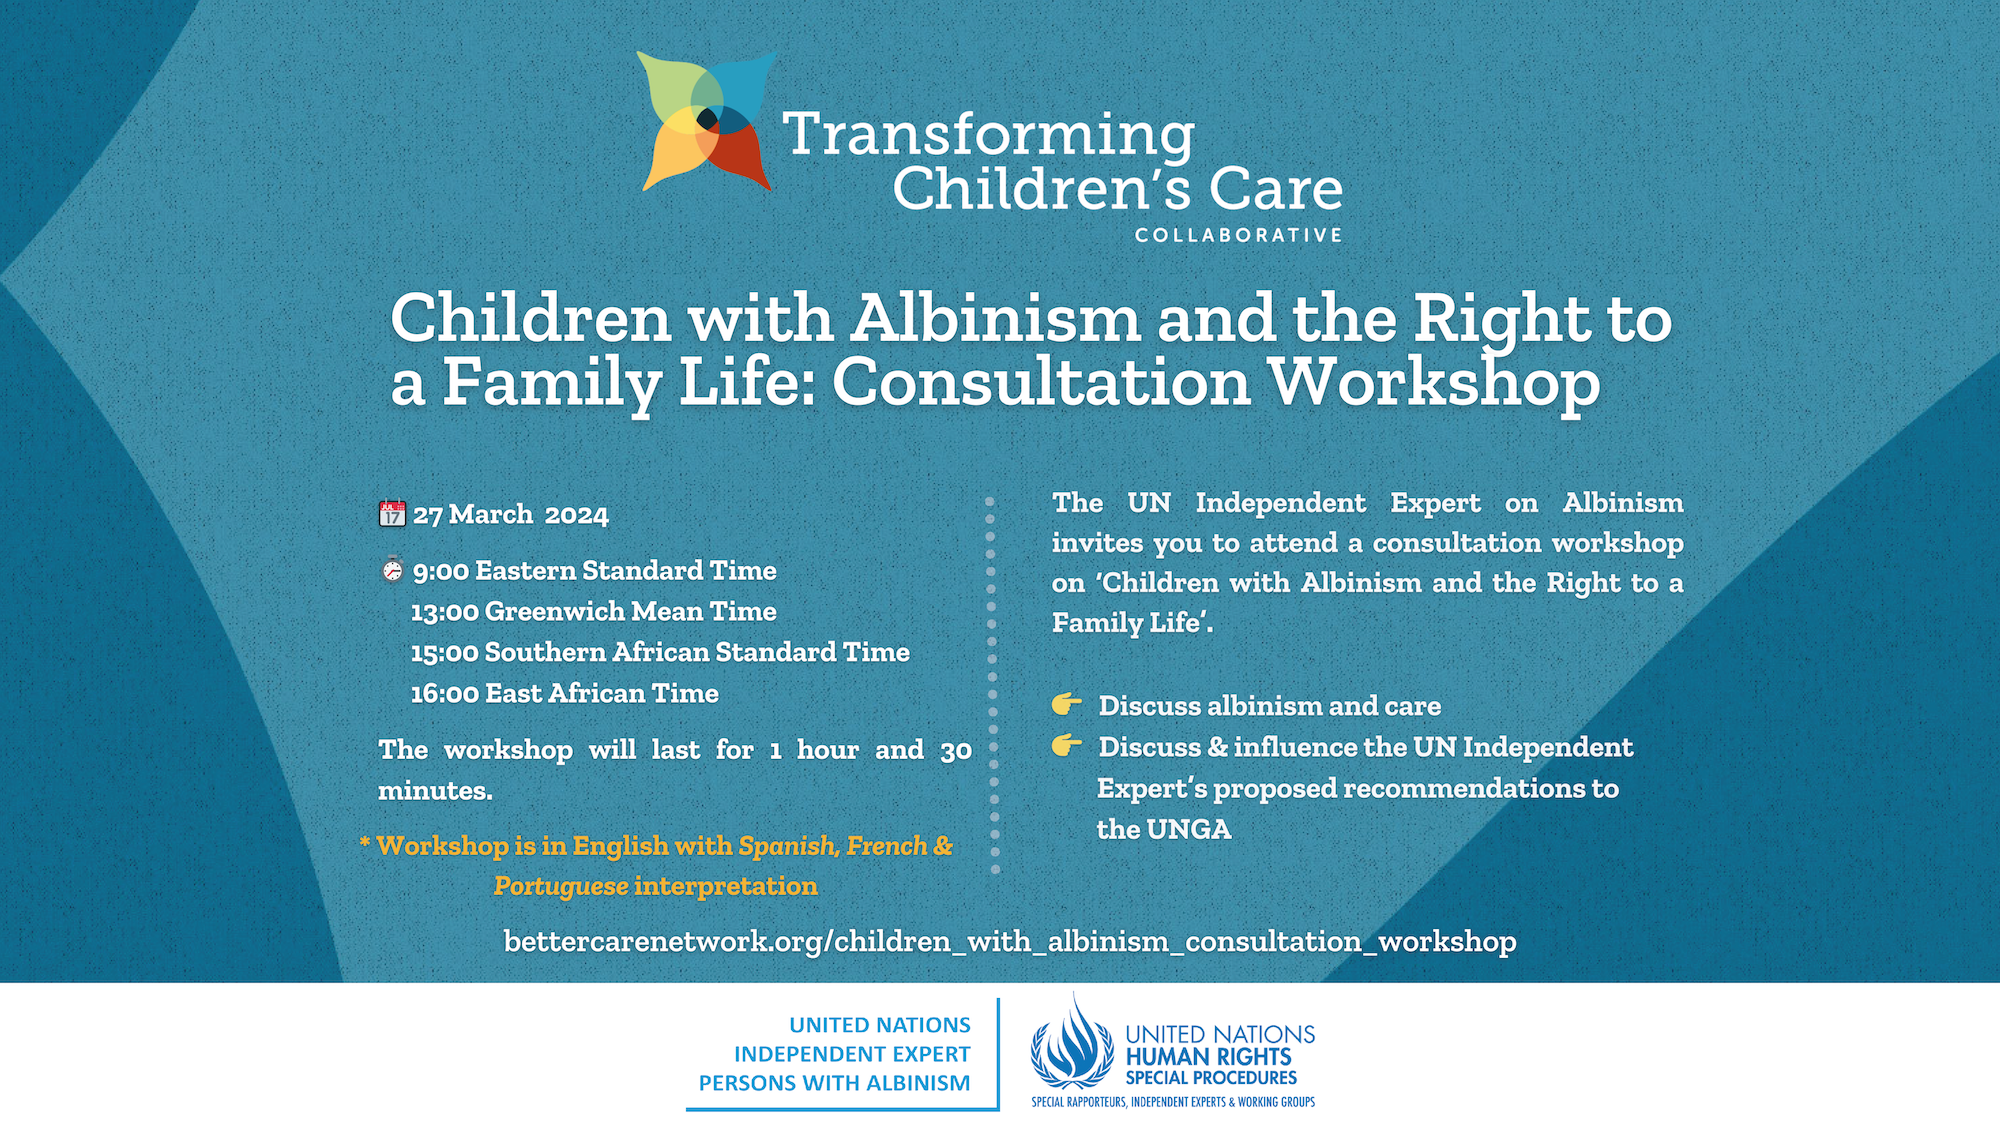 Children with Albinism and the Right to a Family Life: Consultation Workshop